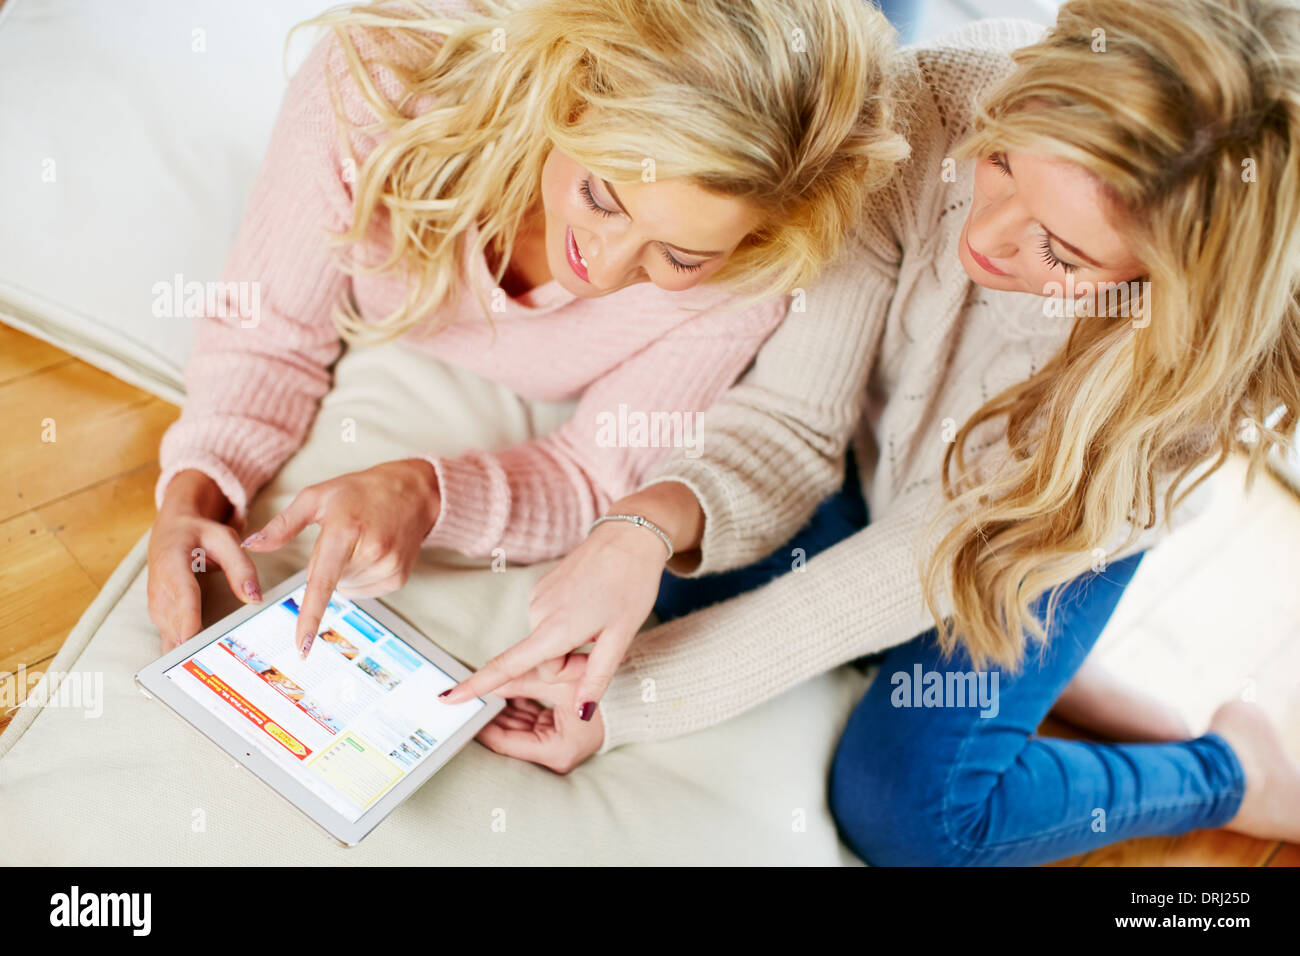 Girls looking at booking a holiday online Stock Photo